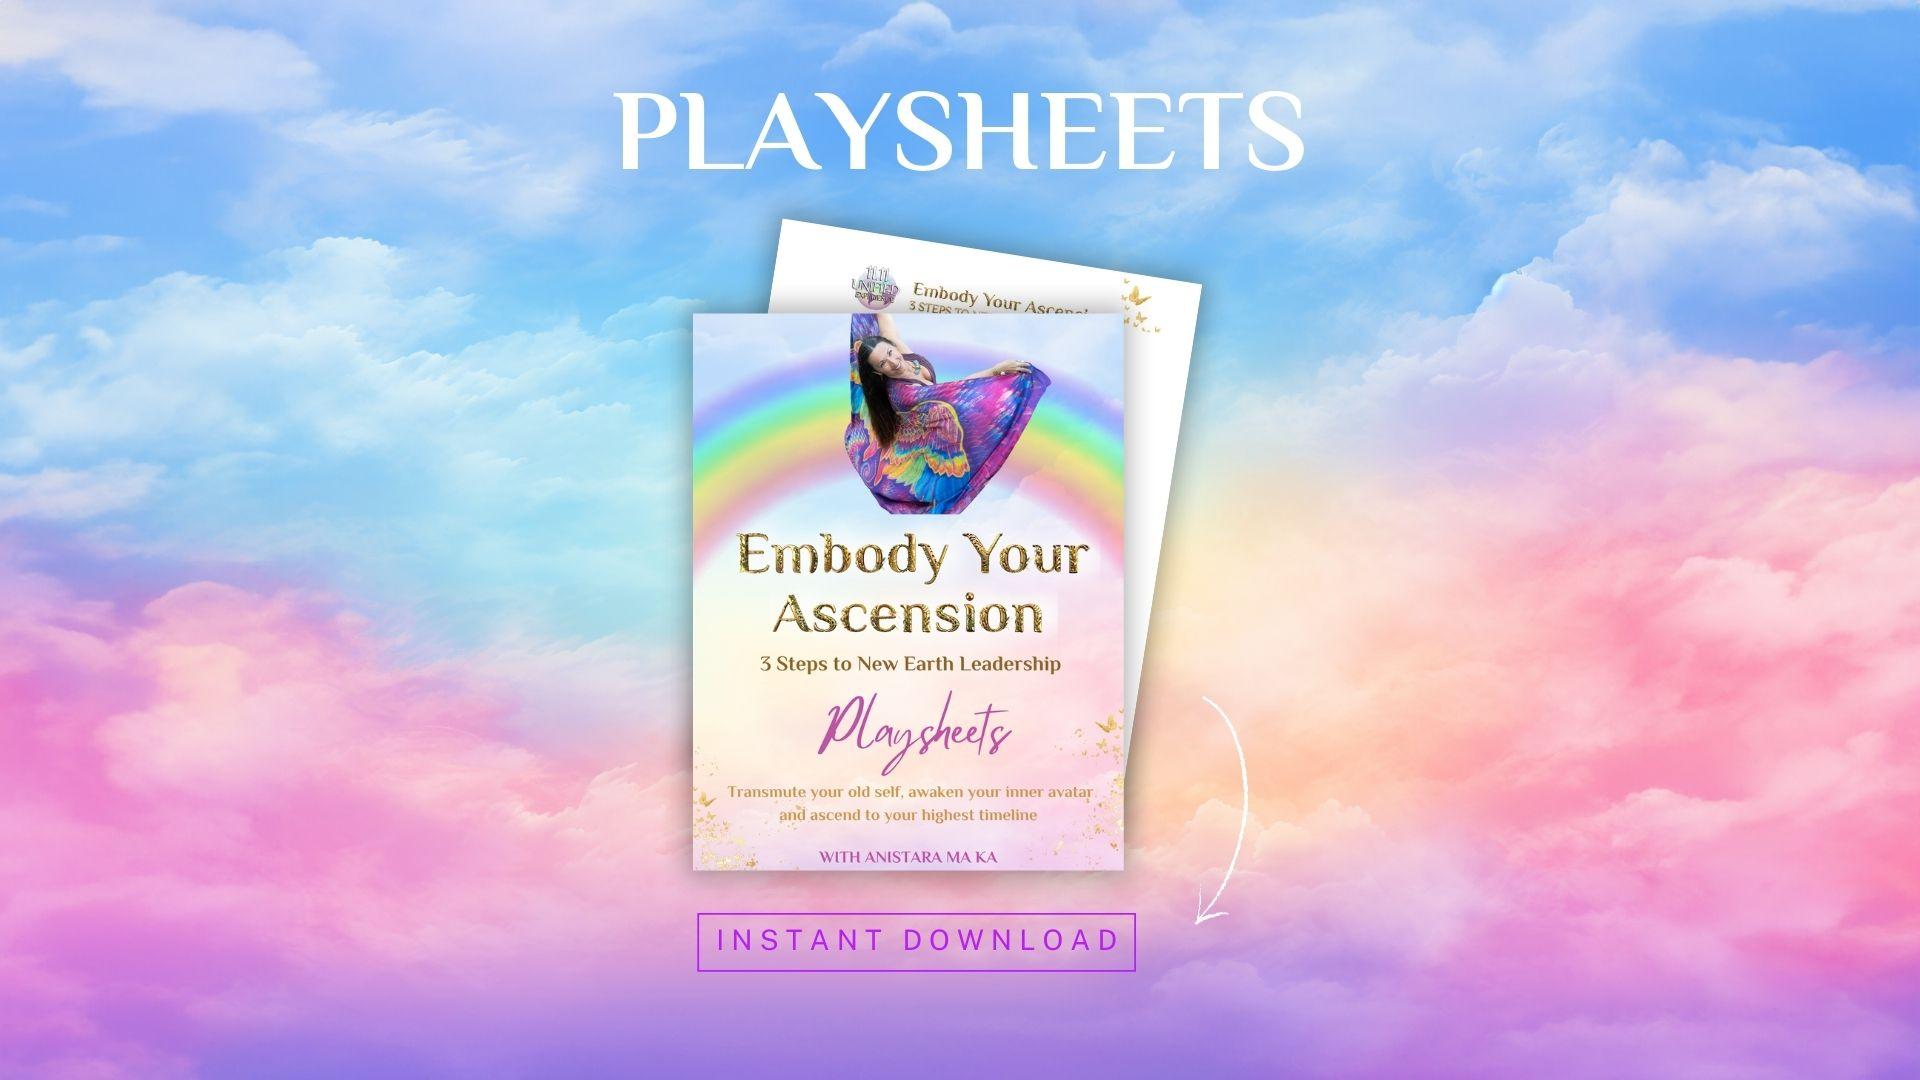 Download Your Playsheet Here!